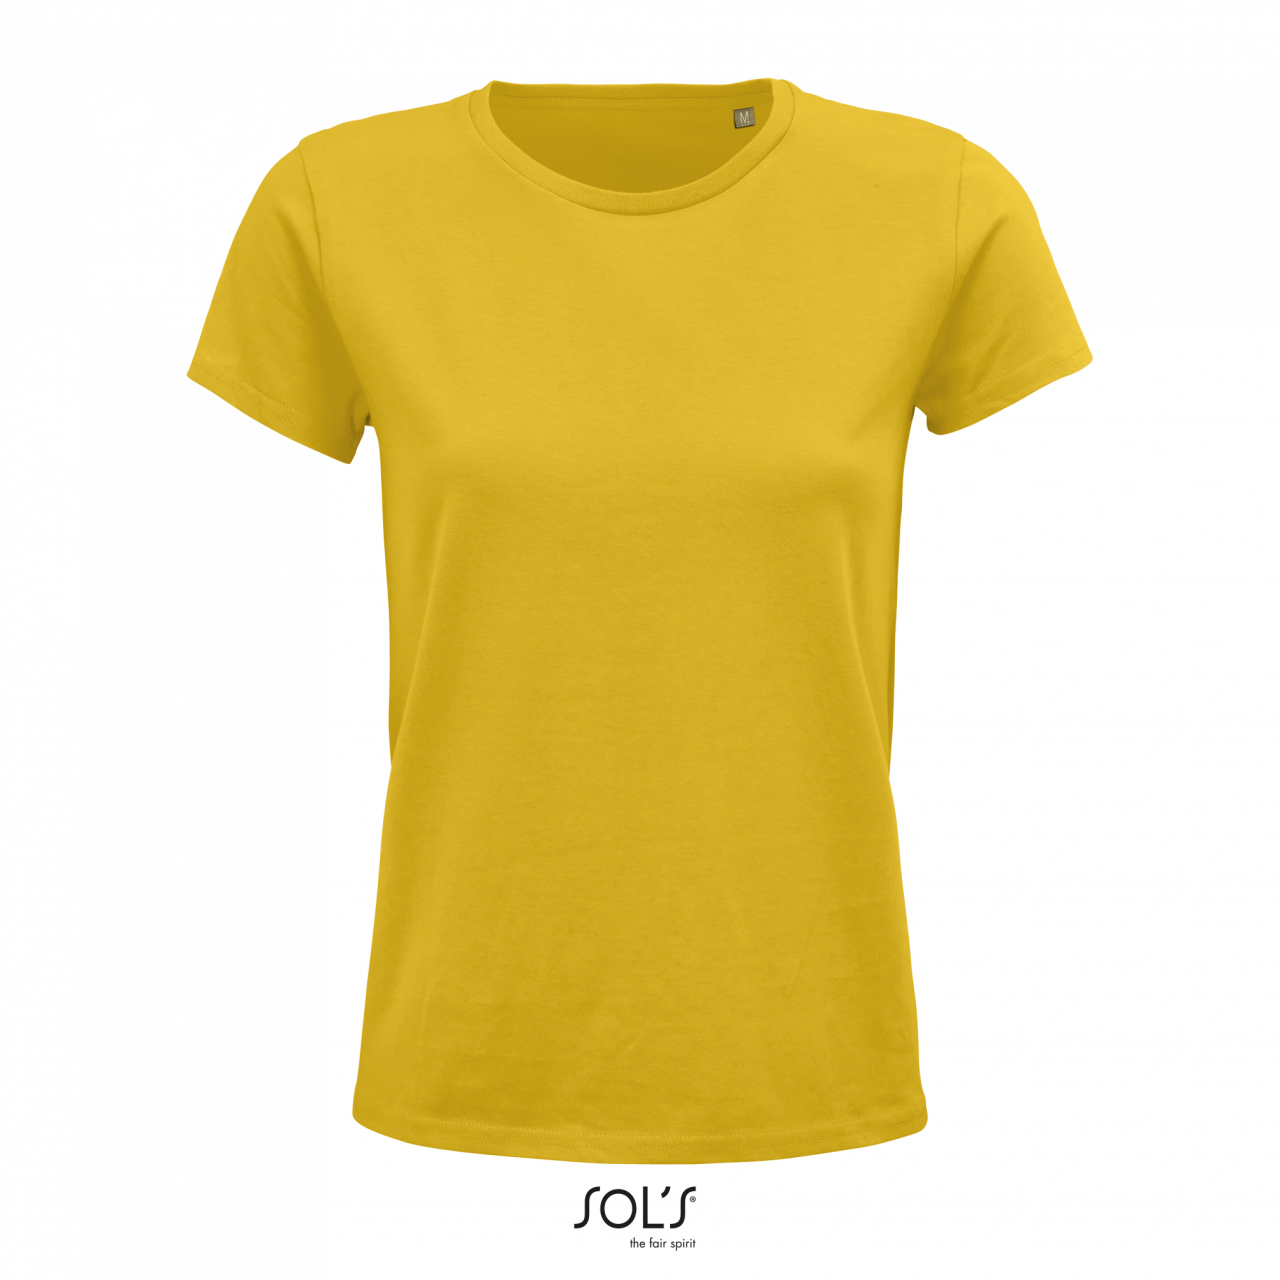 Sol's Crusader Women - Round-neck Fitted Jersey T-shirt - Sol's Crusader Women - Round-neck Fitted Jersey T-shirt - Gold